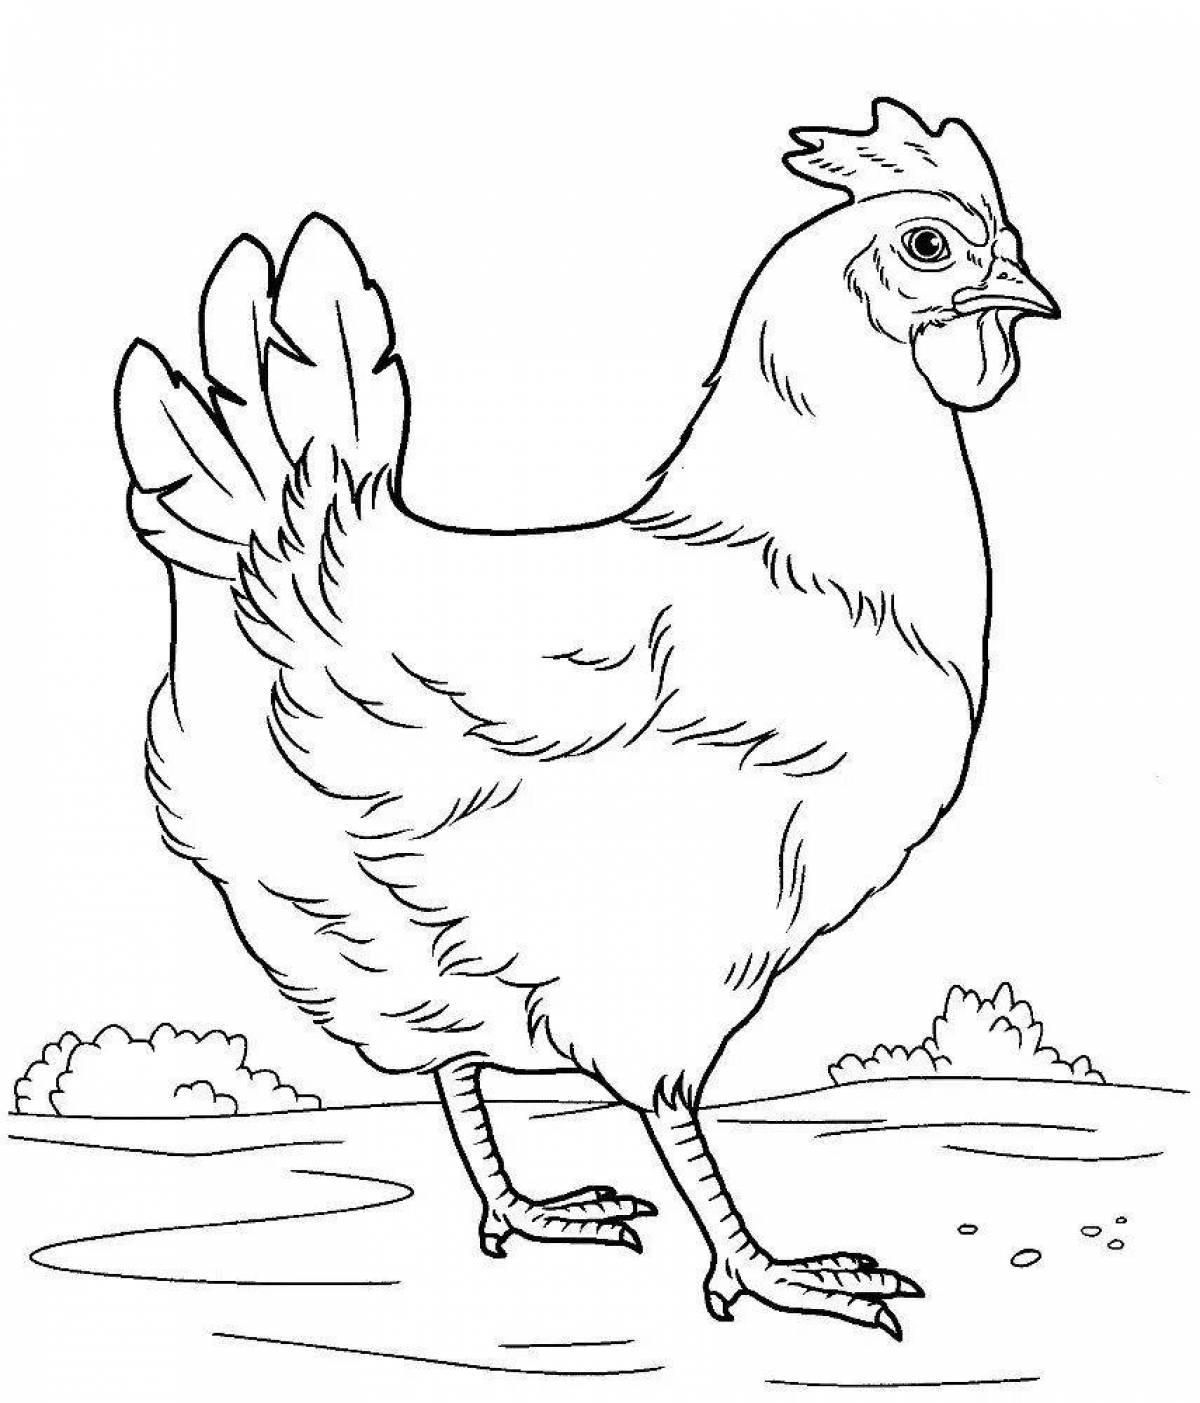 Coloring page sparkling chickens